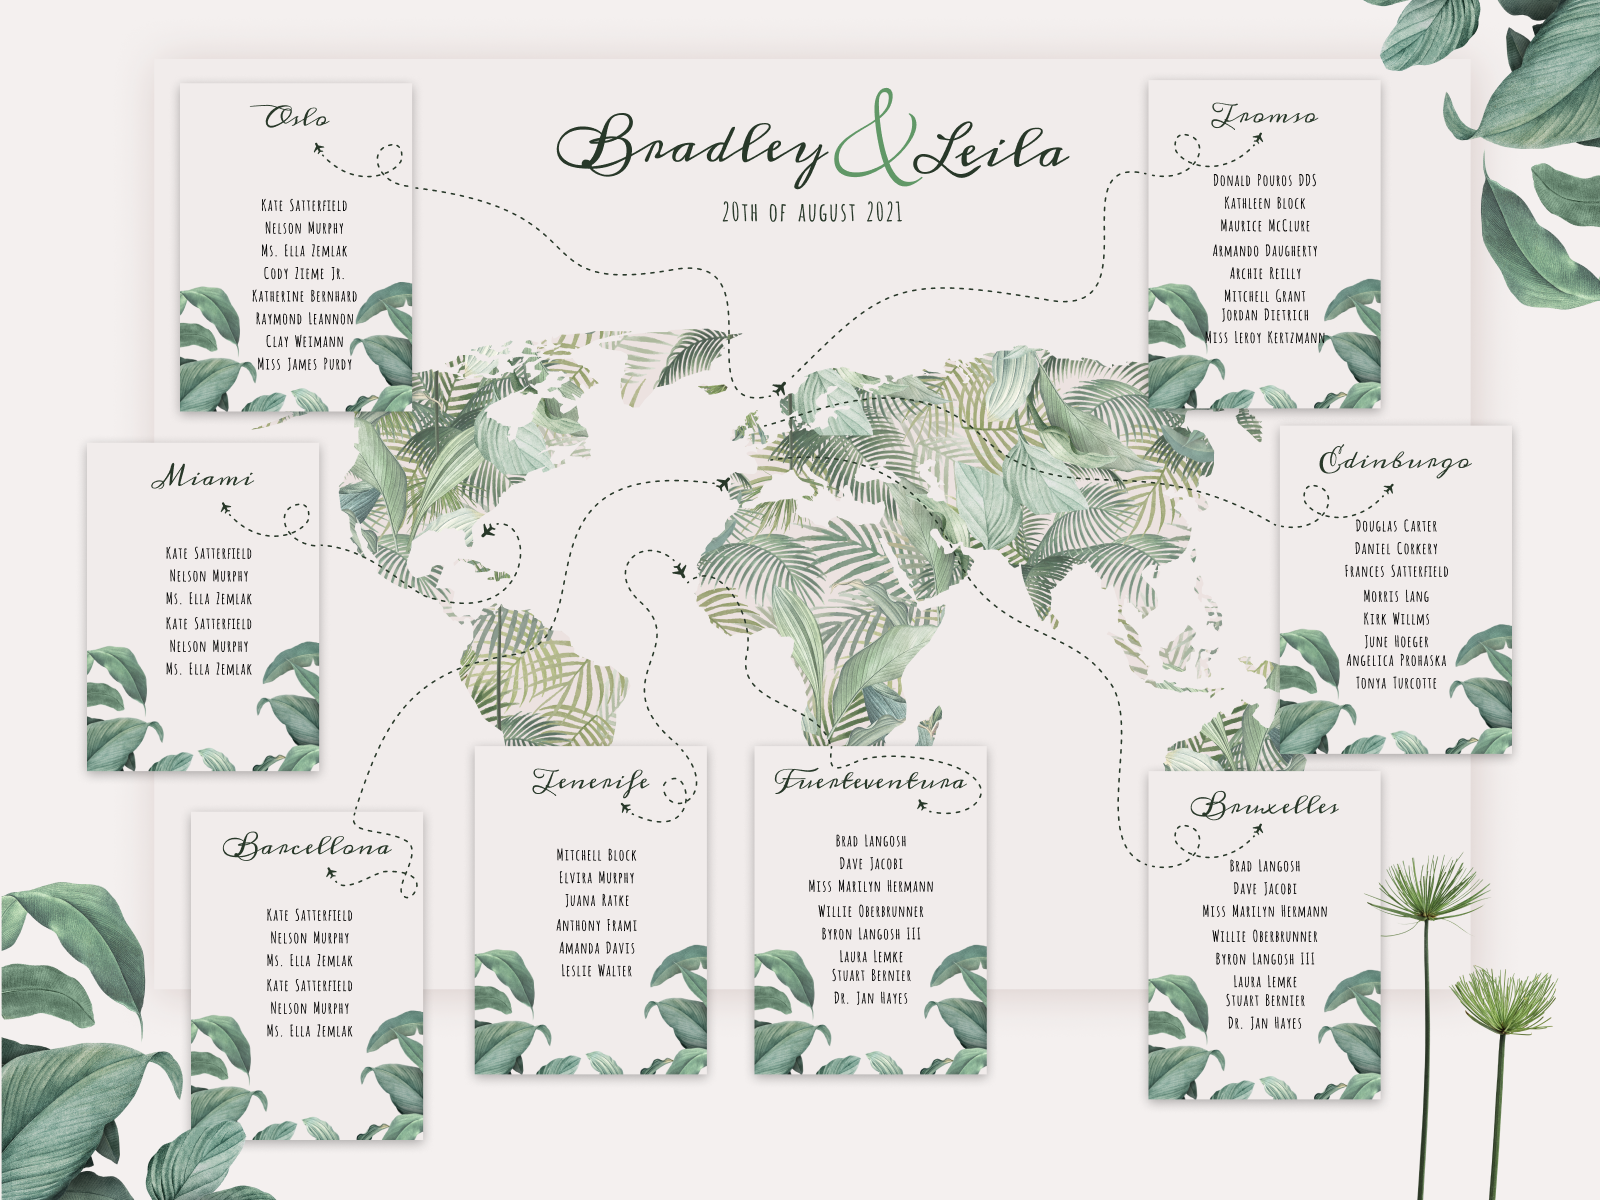 Tableau Mariage - around the World by Luisa Berta on Dribbble